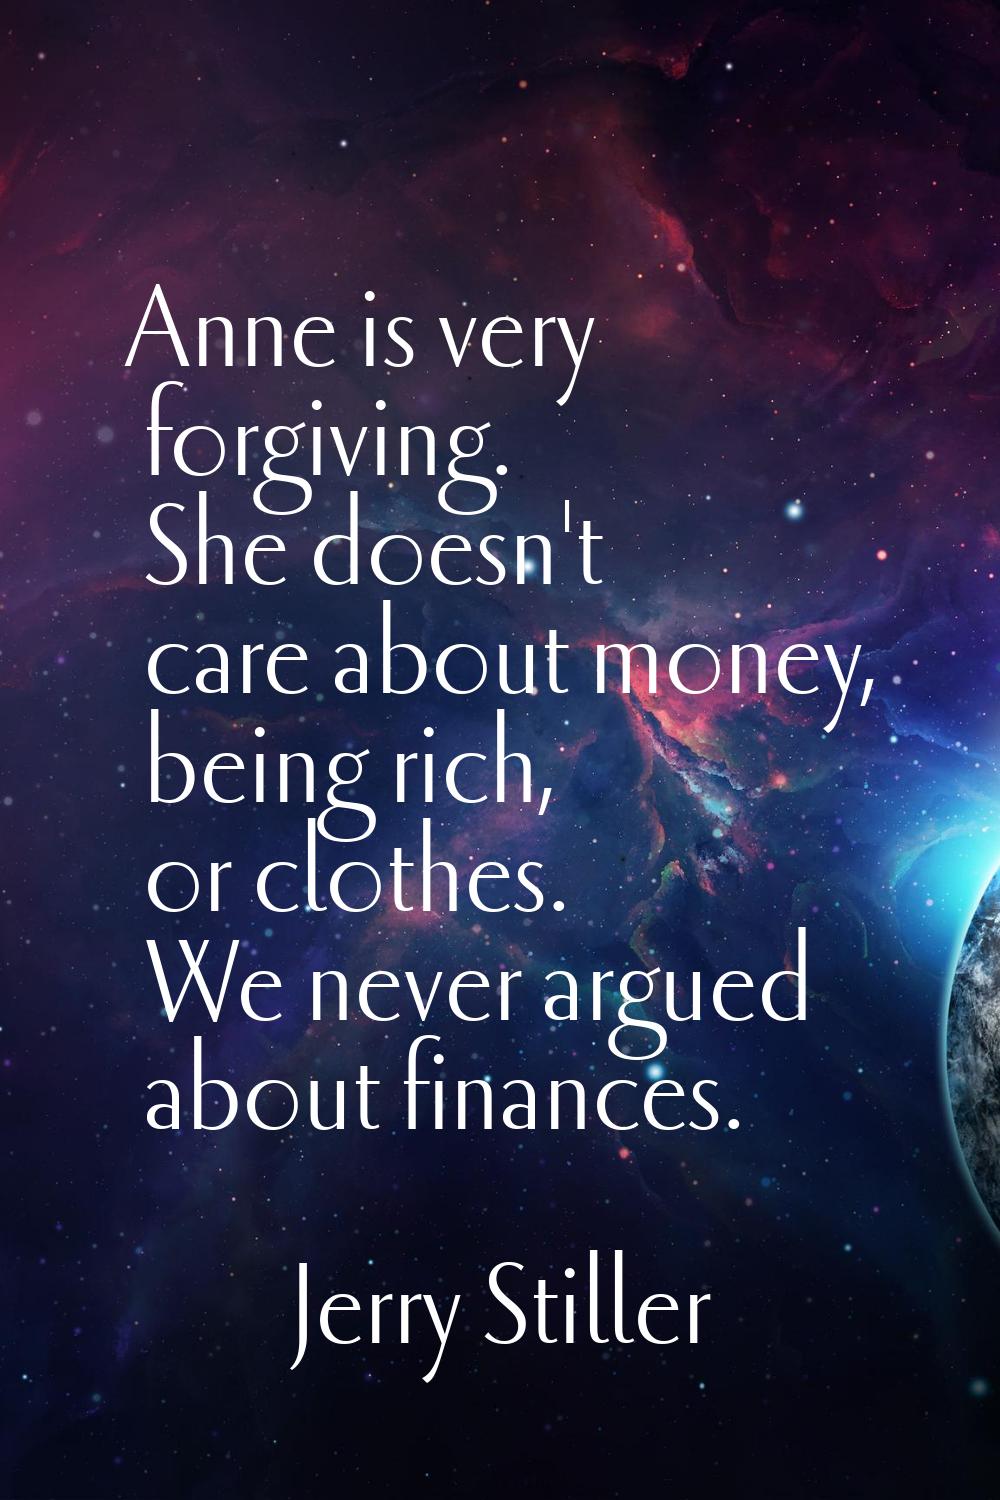 Anne is very forgiving. She doesn't care about money, being rich, or clothes. We never argued about